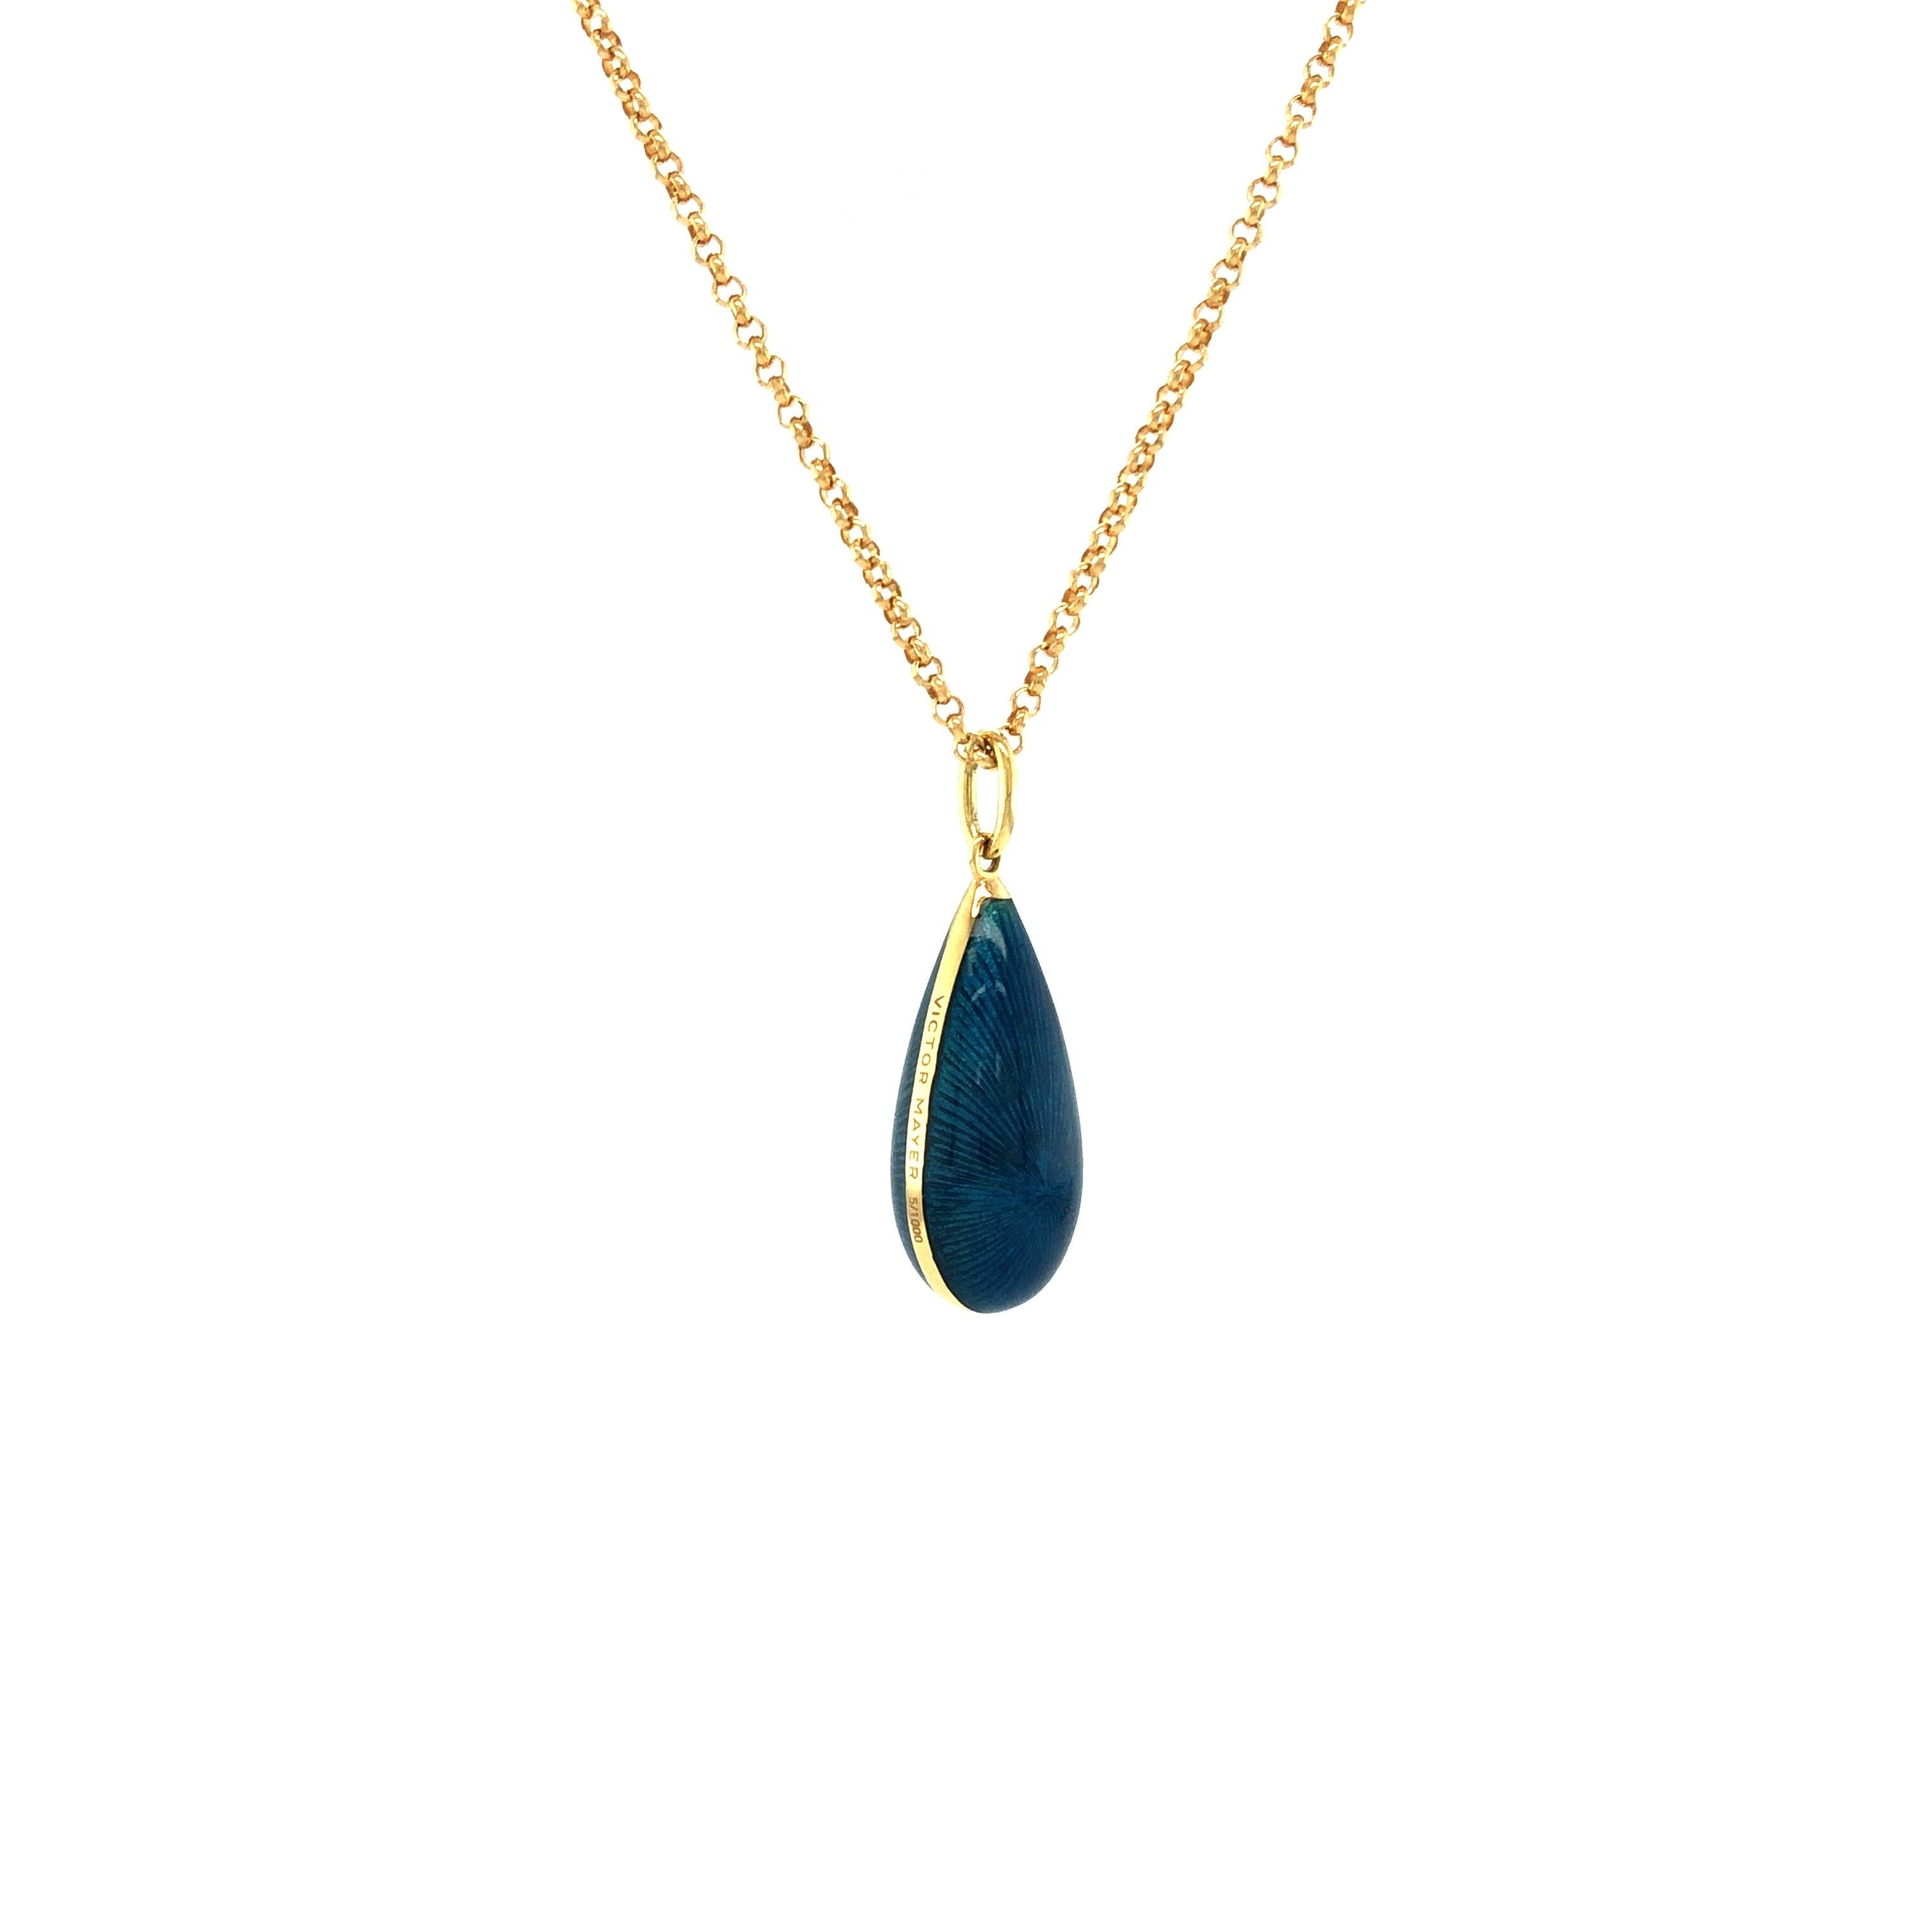 Victor Mayer drop pendant necklace, 18k yellow gold, petrol blue vitreous enamel, Dew Drop collection, measurements app. 7.6 mm x 22 mm

About the creator Victor Mayer
Victor Mayer is internationally renowned for elegant timeless designs and